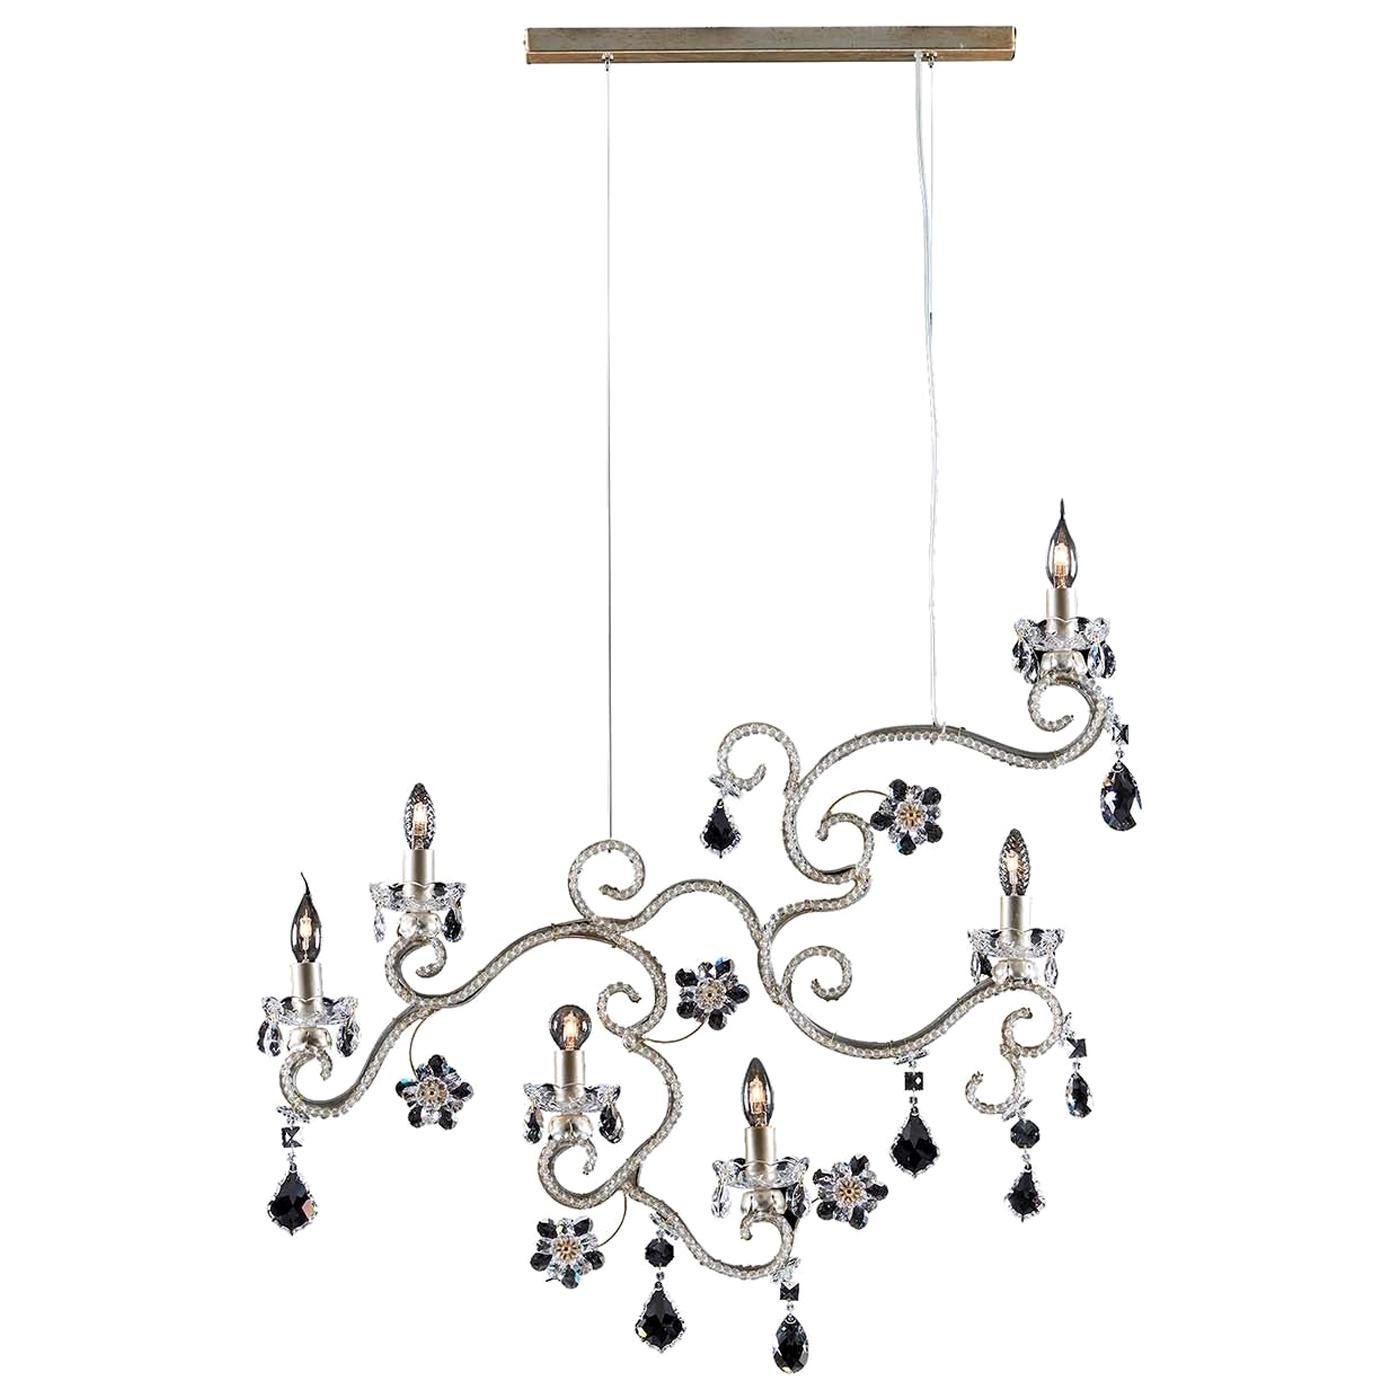 This is a metal suspension lamp characterized by a multitude of deluxe decorations. The structure is embellished with antiqued-silver coating and rows of polished beads, with flowers and pendants in Asfour crystal to top it off. It will give a